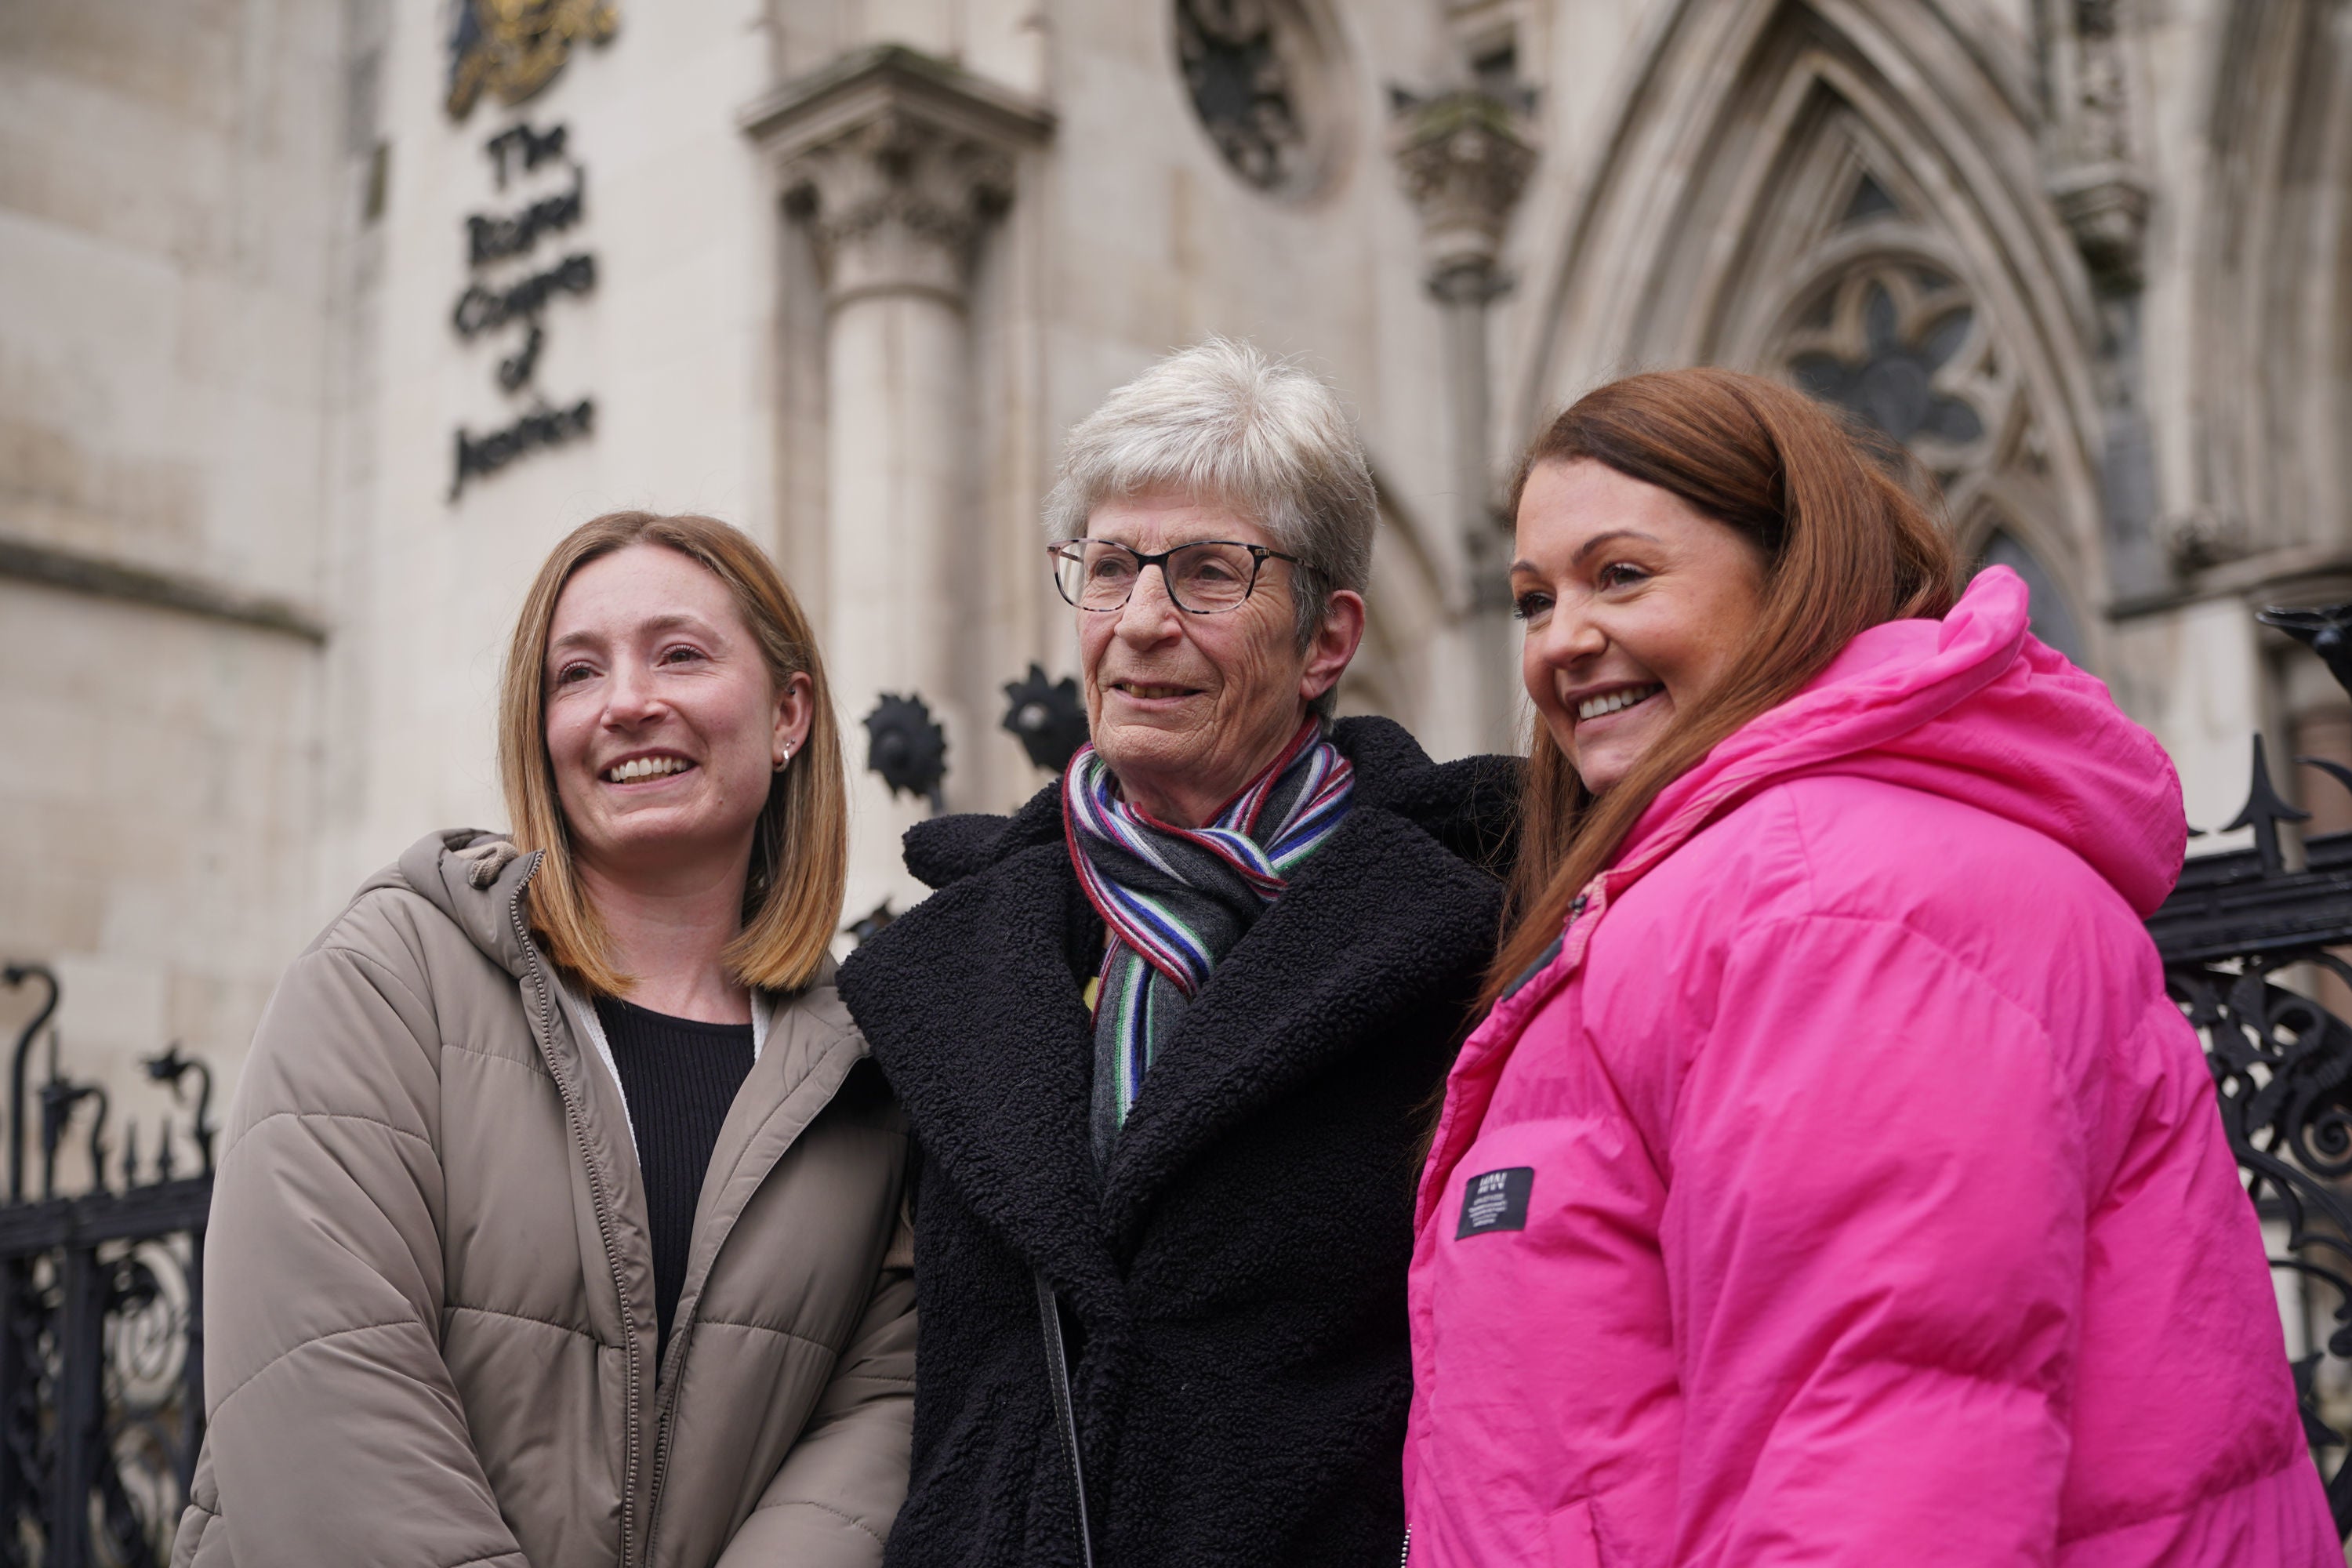 Former subpostmistress Kathleen Crane (centre) outside the Royal Courts of Justice in London after judges quashed her fraud conviction